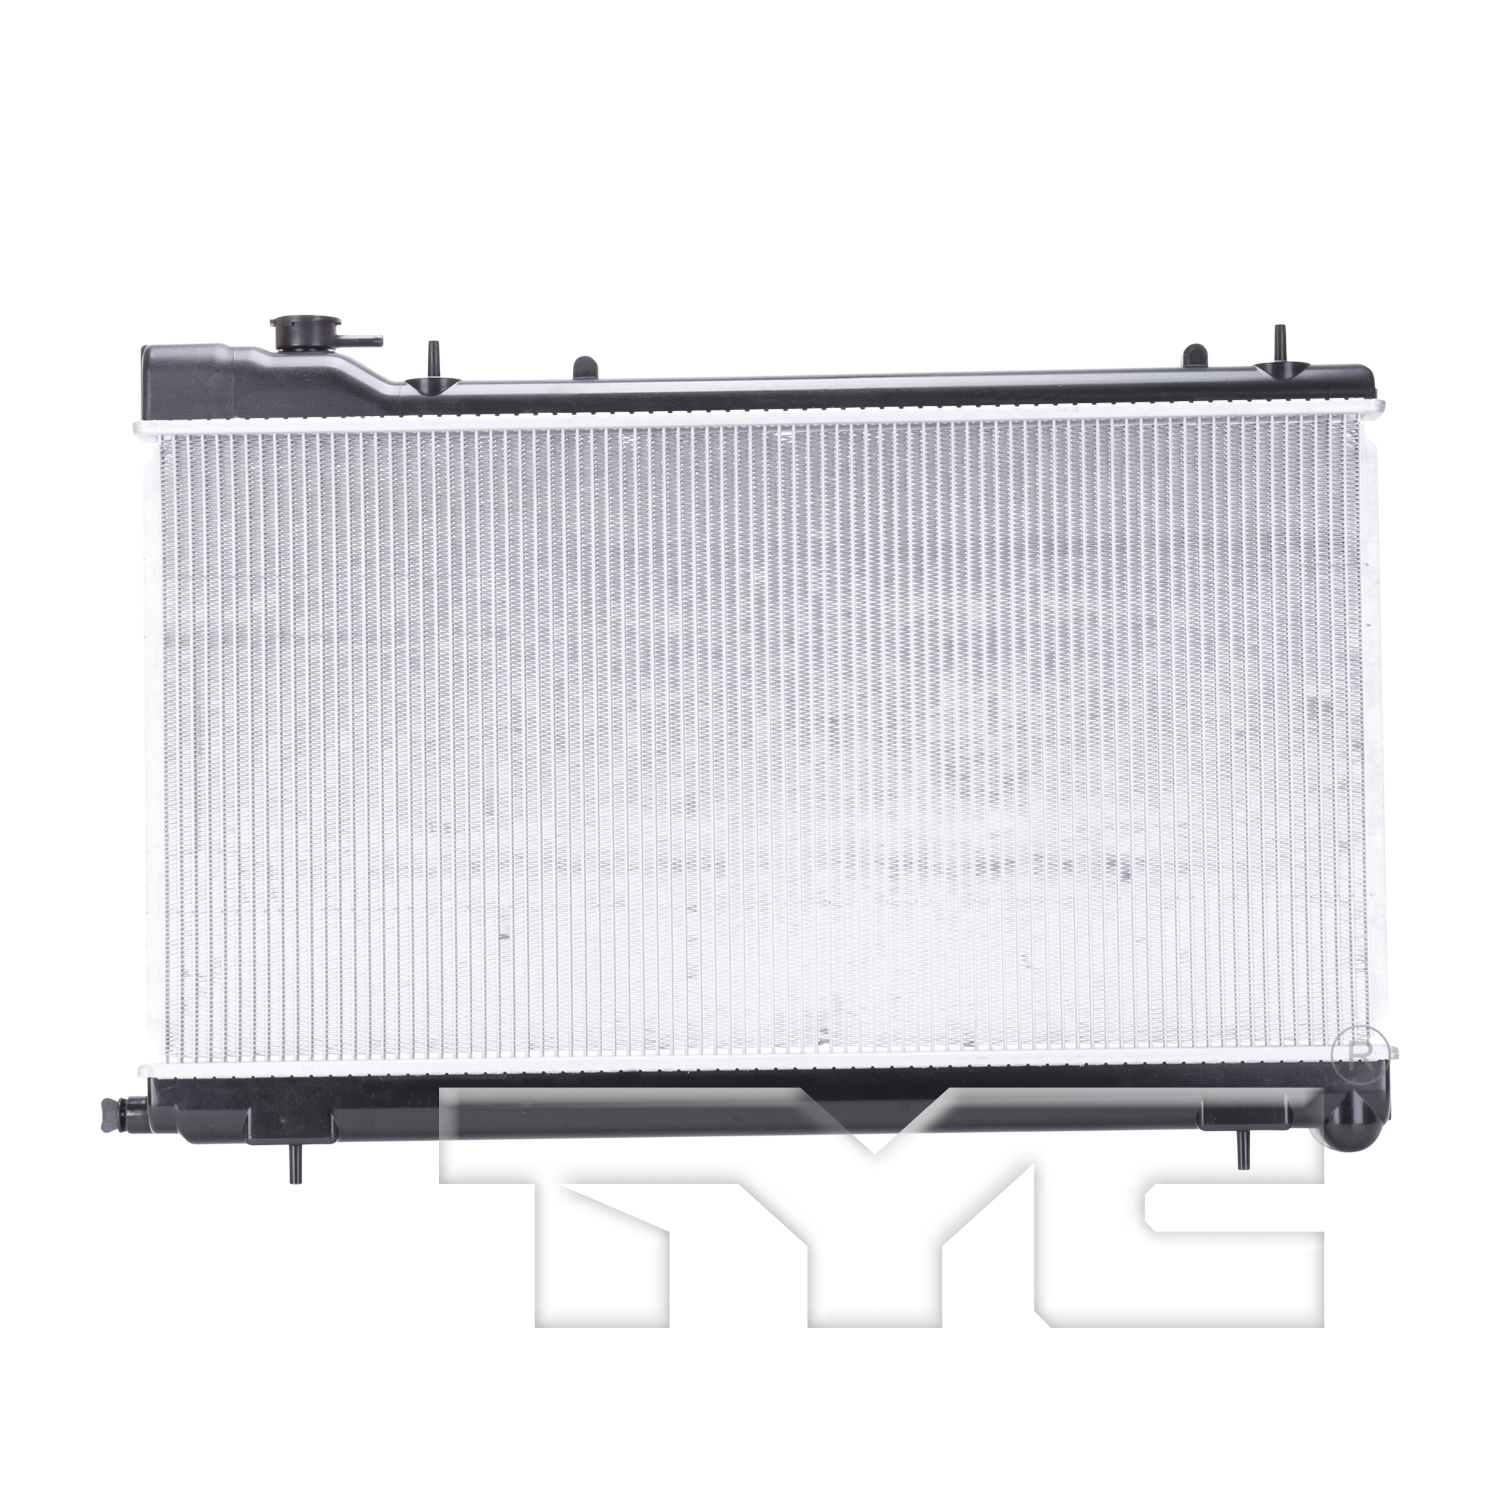 Aftermarket RADIATORS for SUBARU - FORESTER, FORESTER,03-08,Radiator assembly